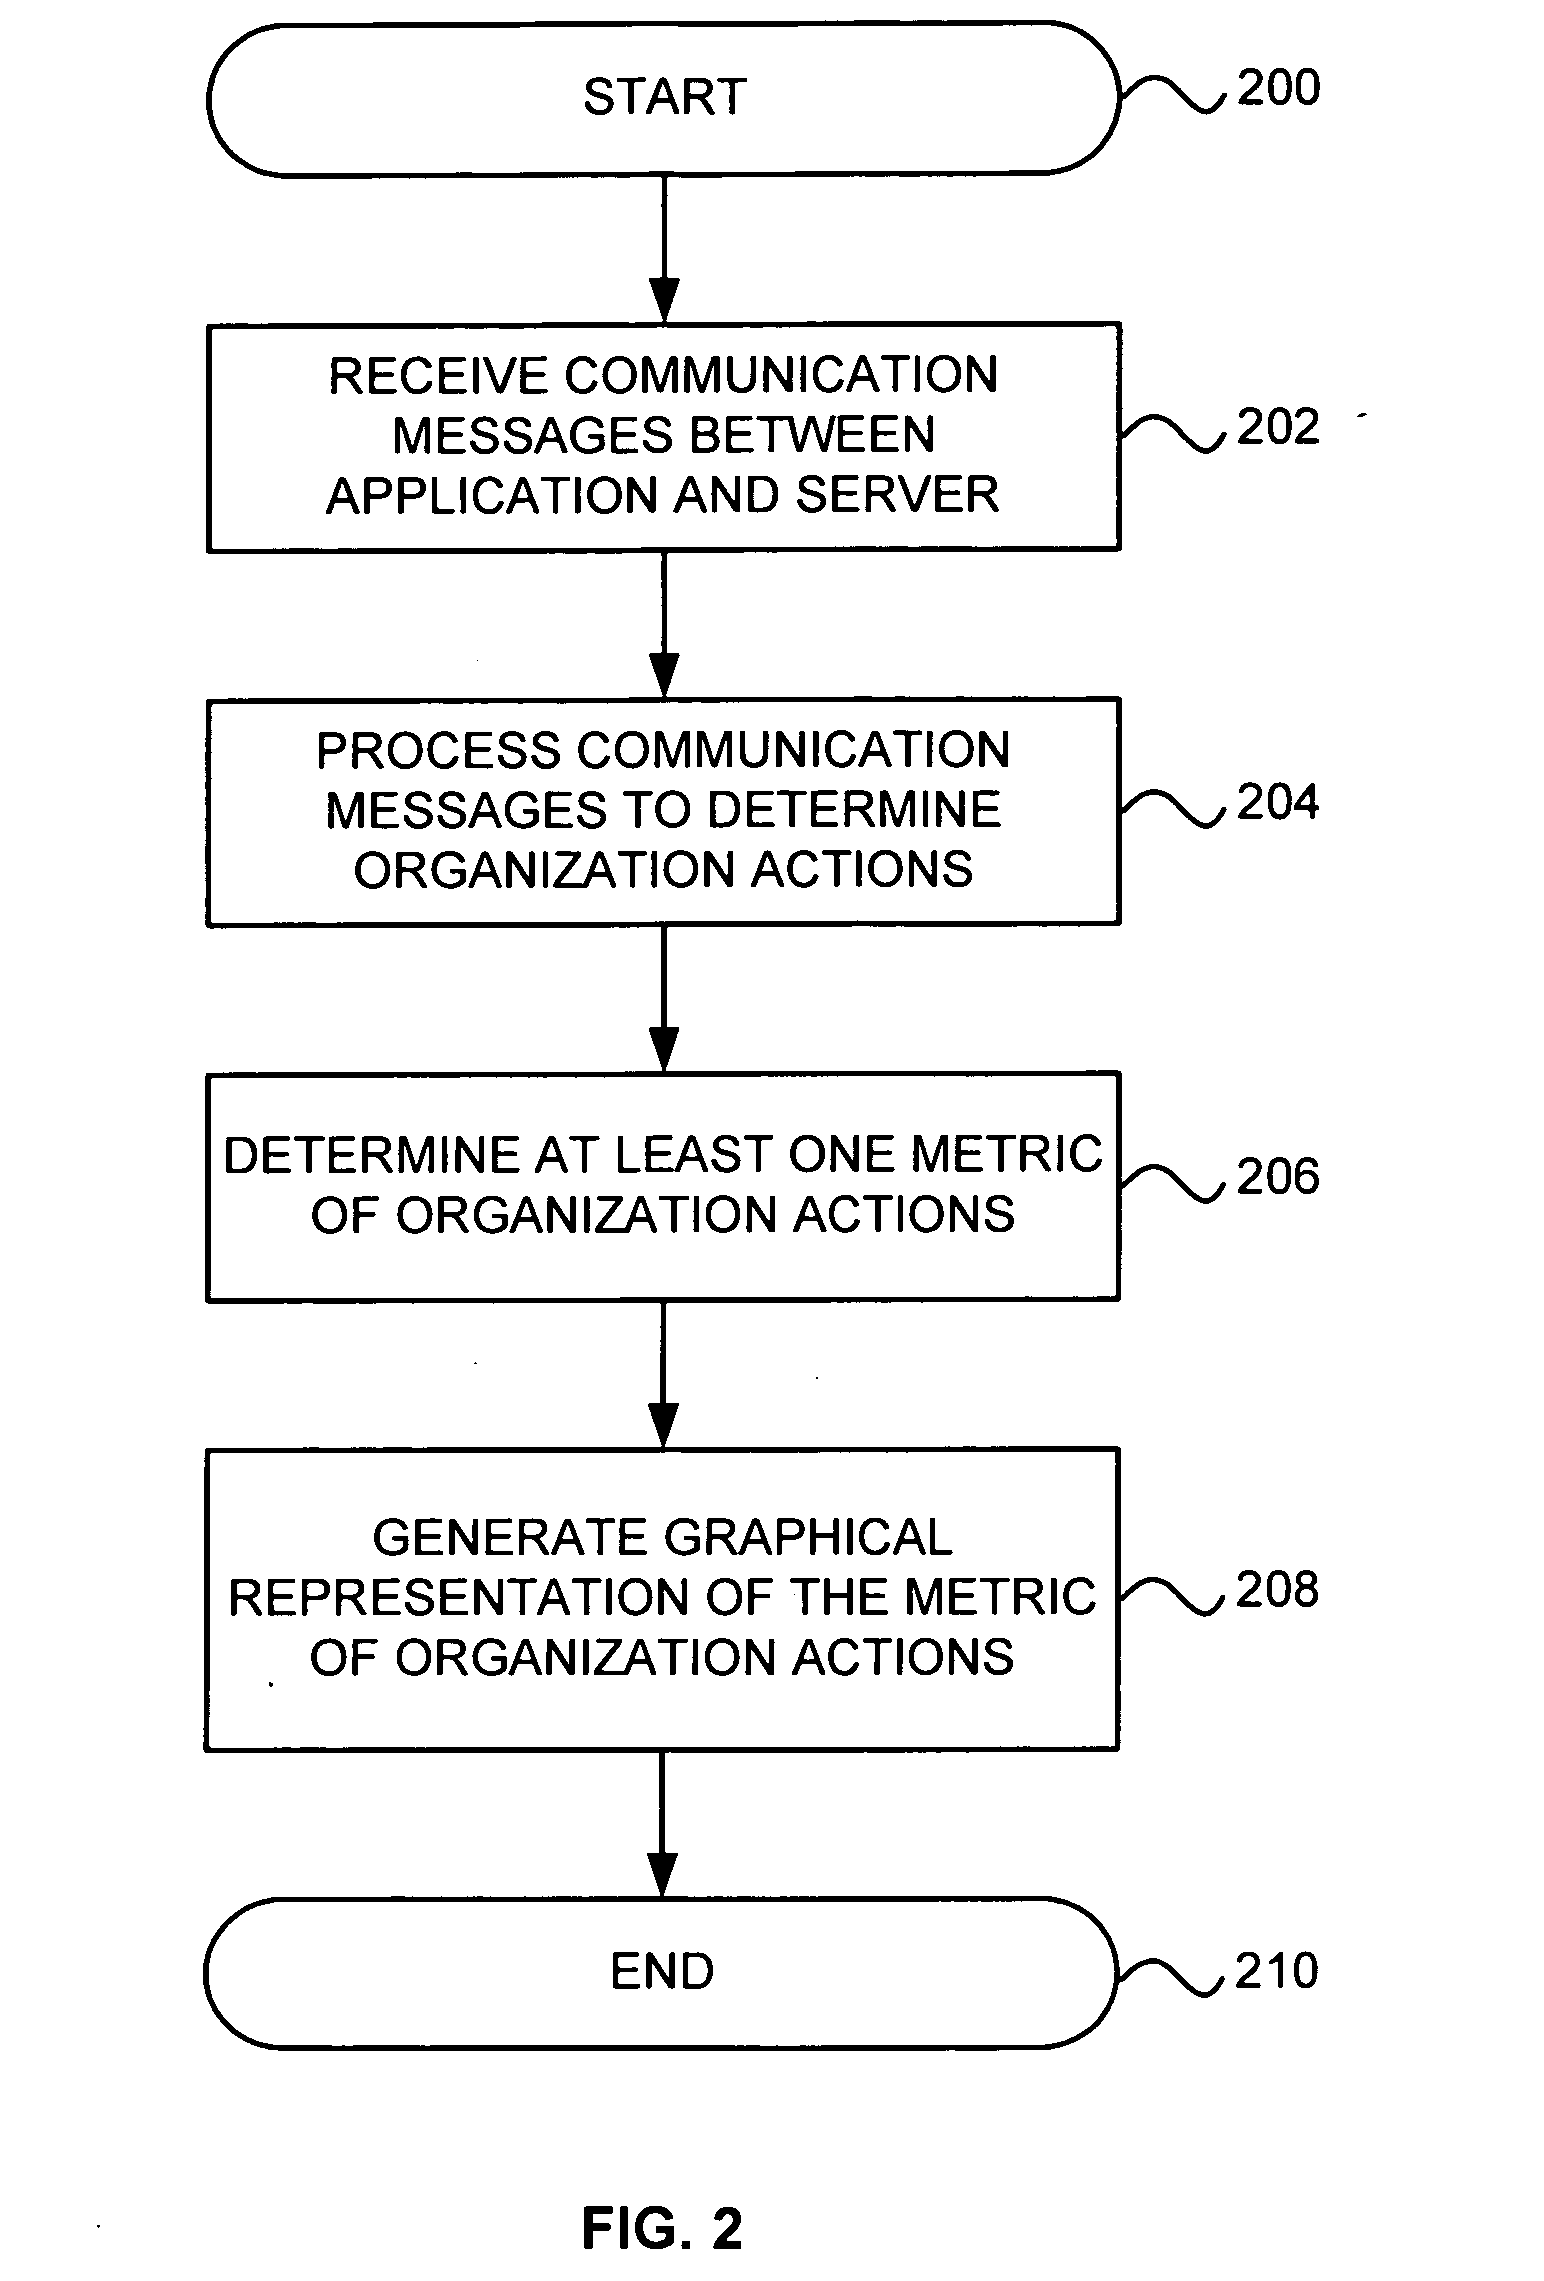 Graphical representation of organization actions